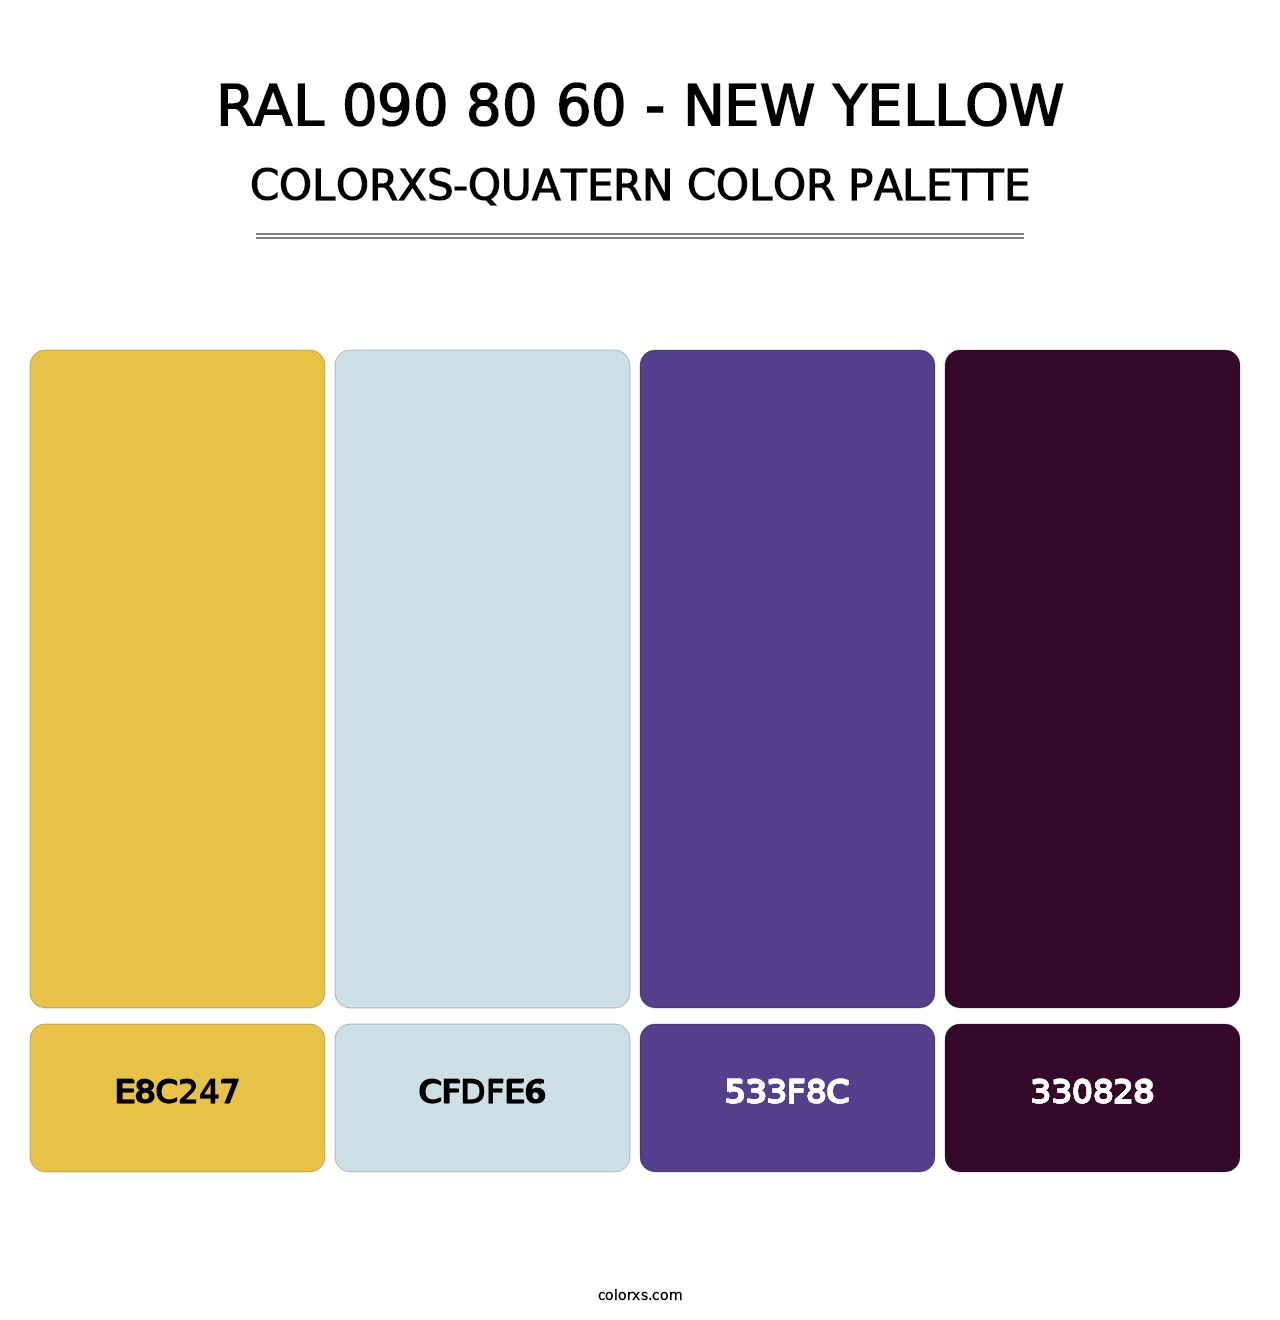 RAL 090 80 60 - New Yellow - Colorxs Quatern Palette